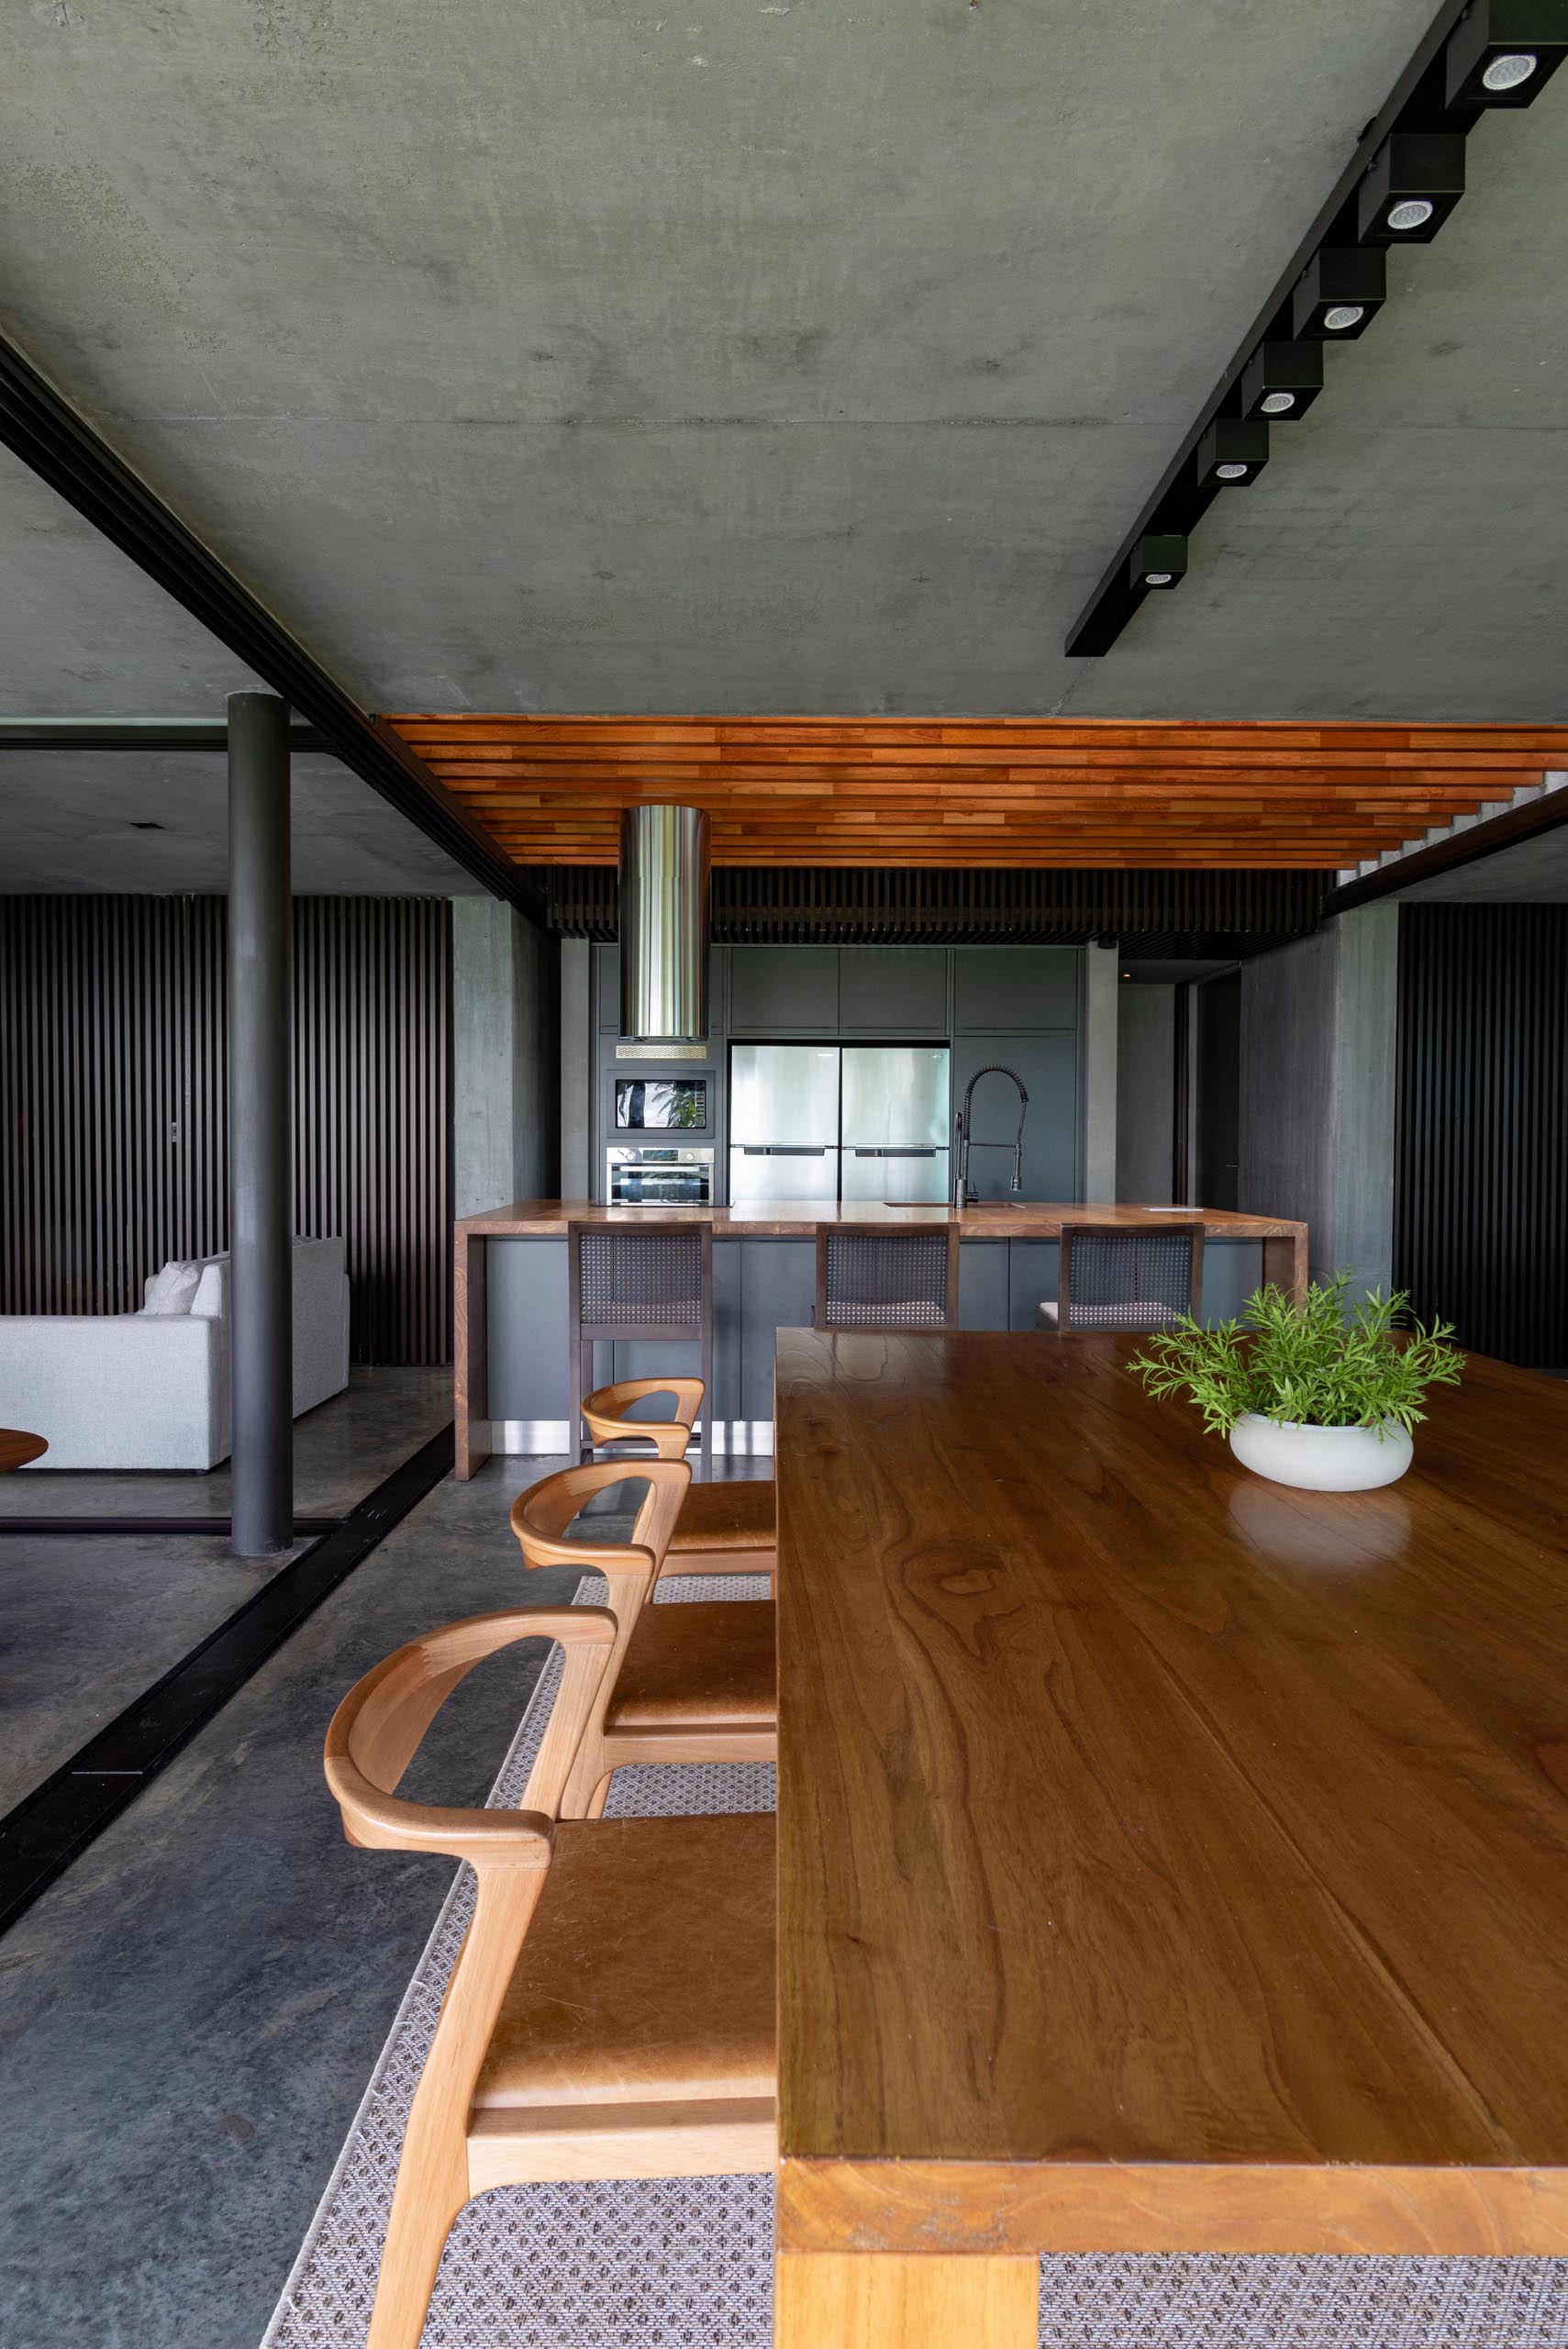 A modern open plan interior that includes a dining room with large wood table, and a kitchen with matte black cabinets.